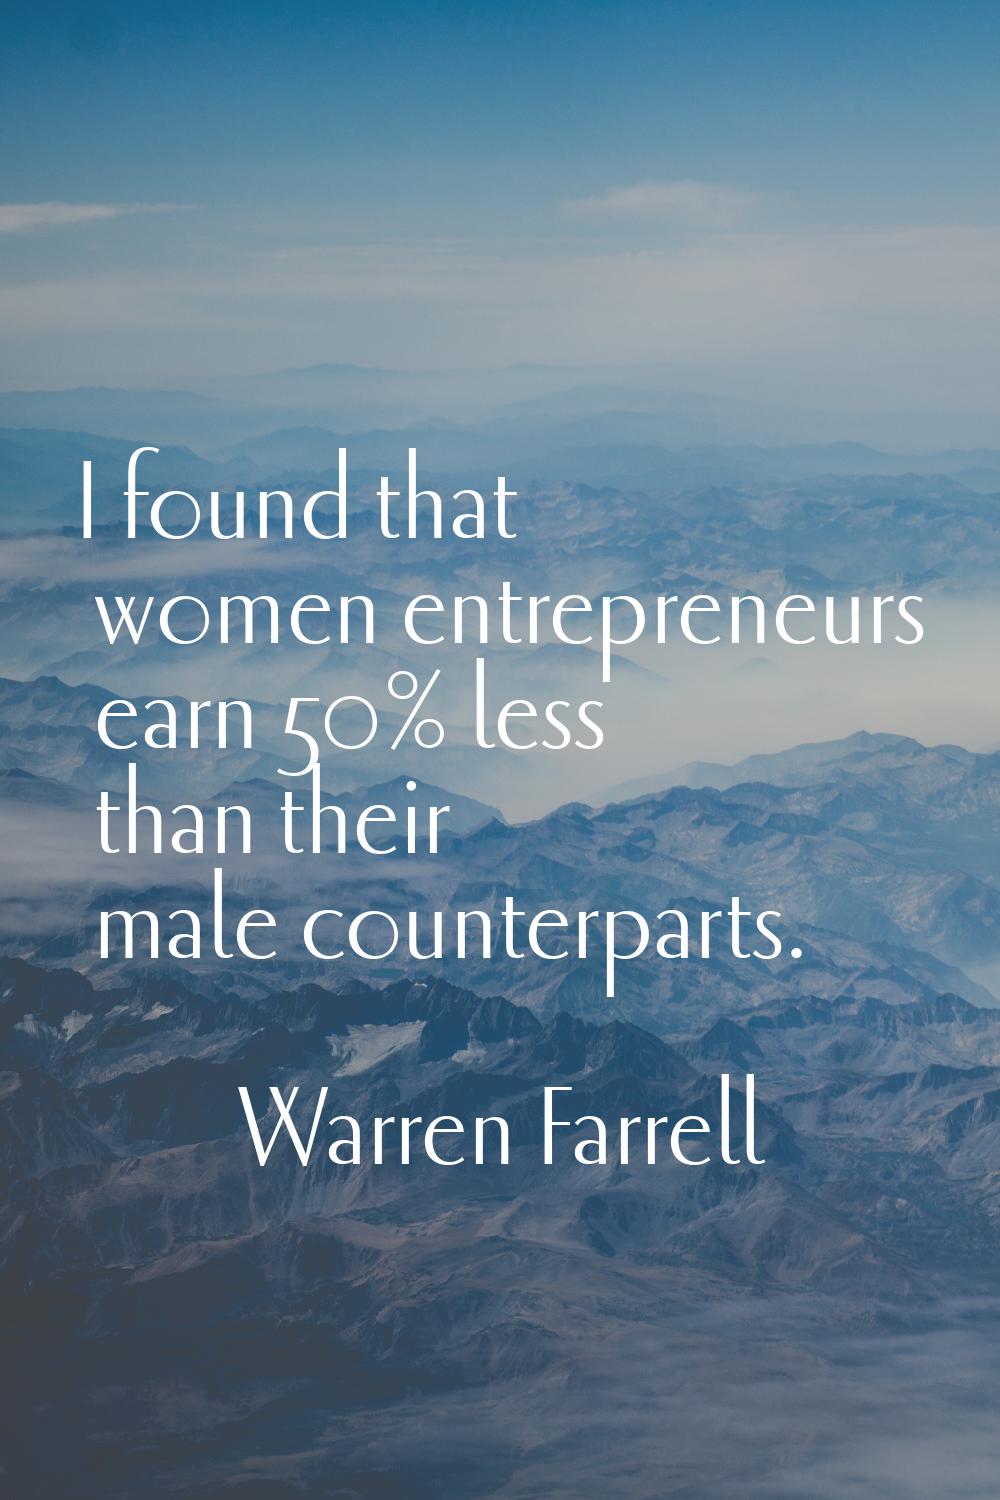 I found that women entrepreneurs earn 50% less than their male counterparts.